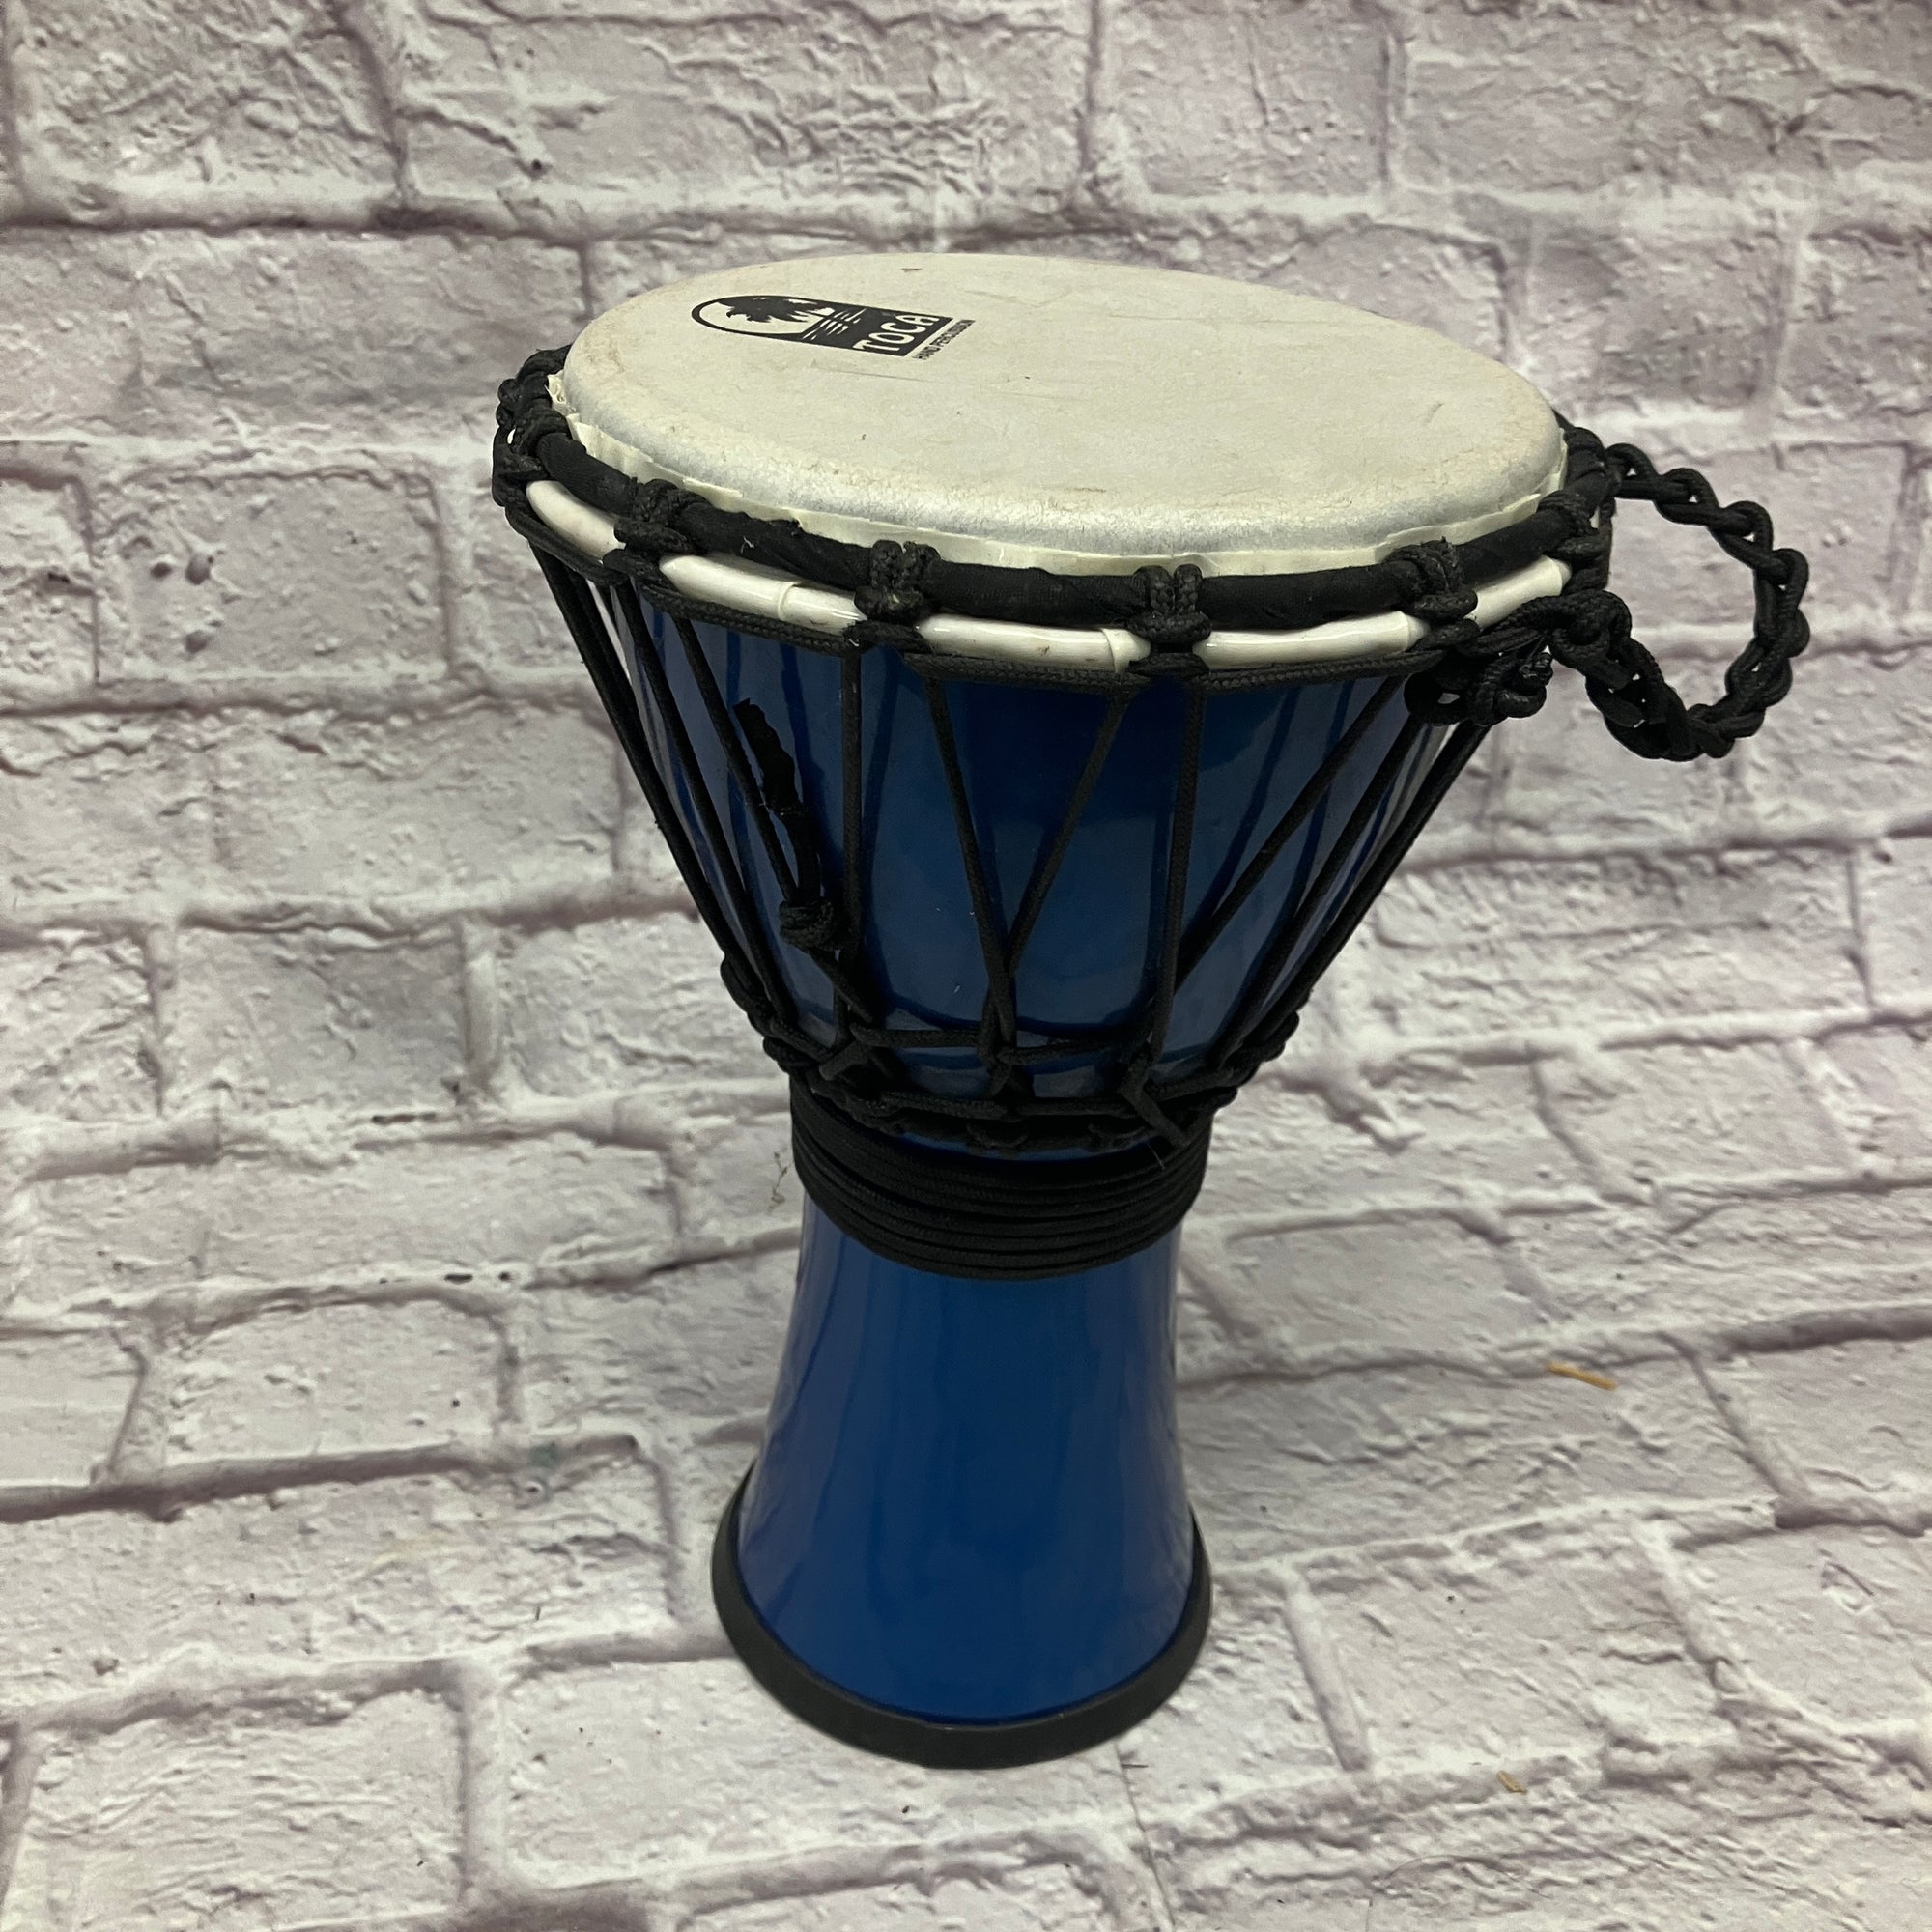 Toca Djembe Freestyle Colorsound